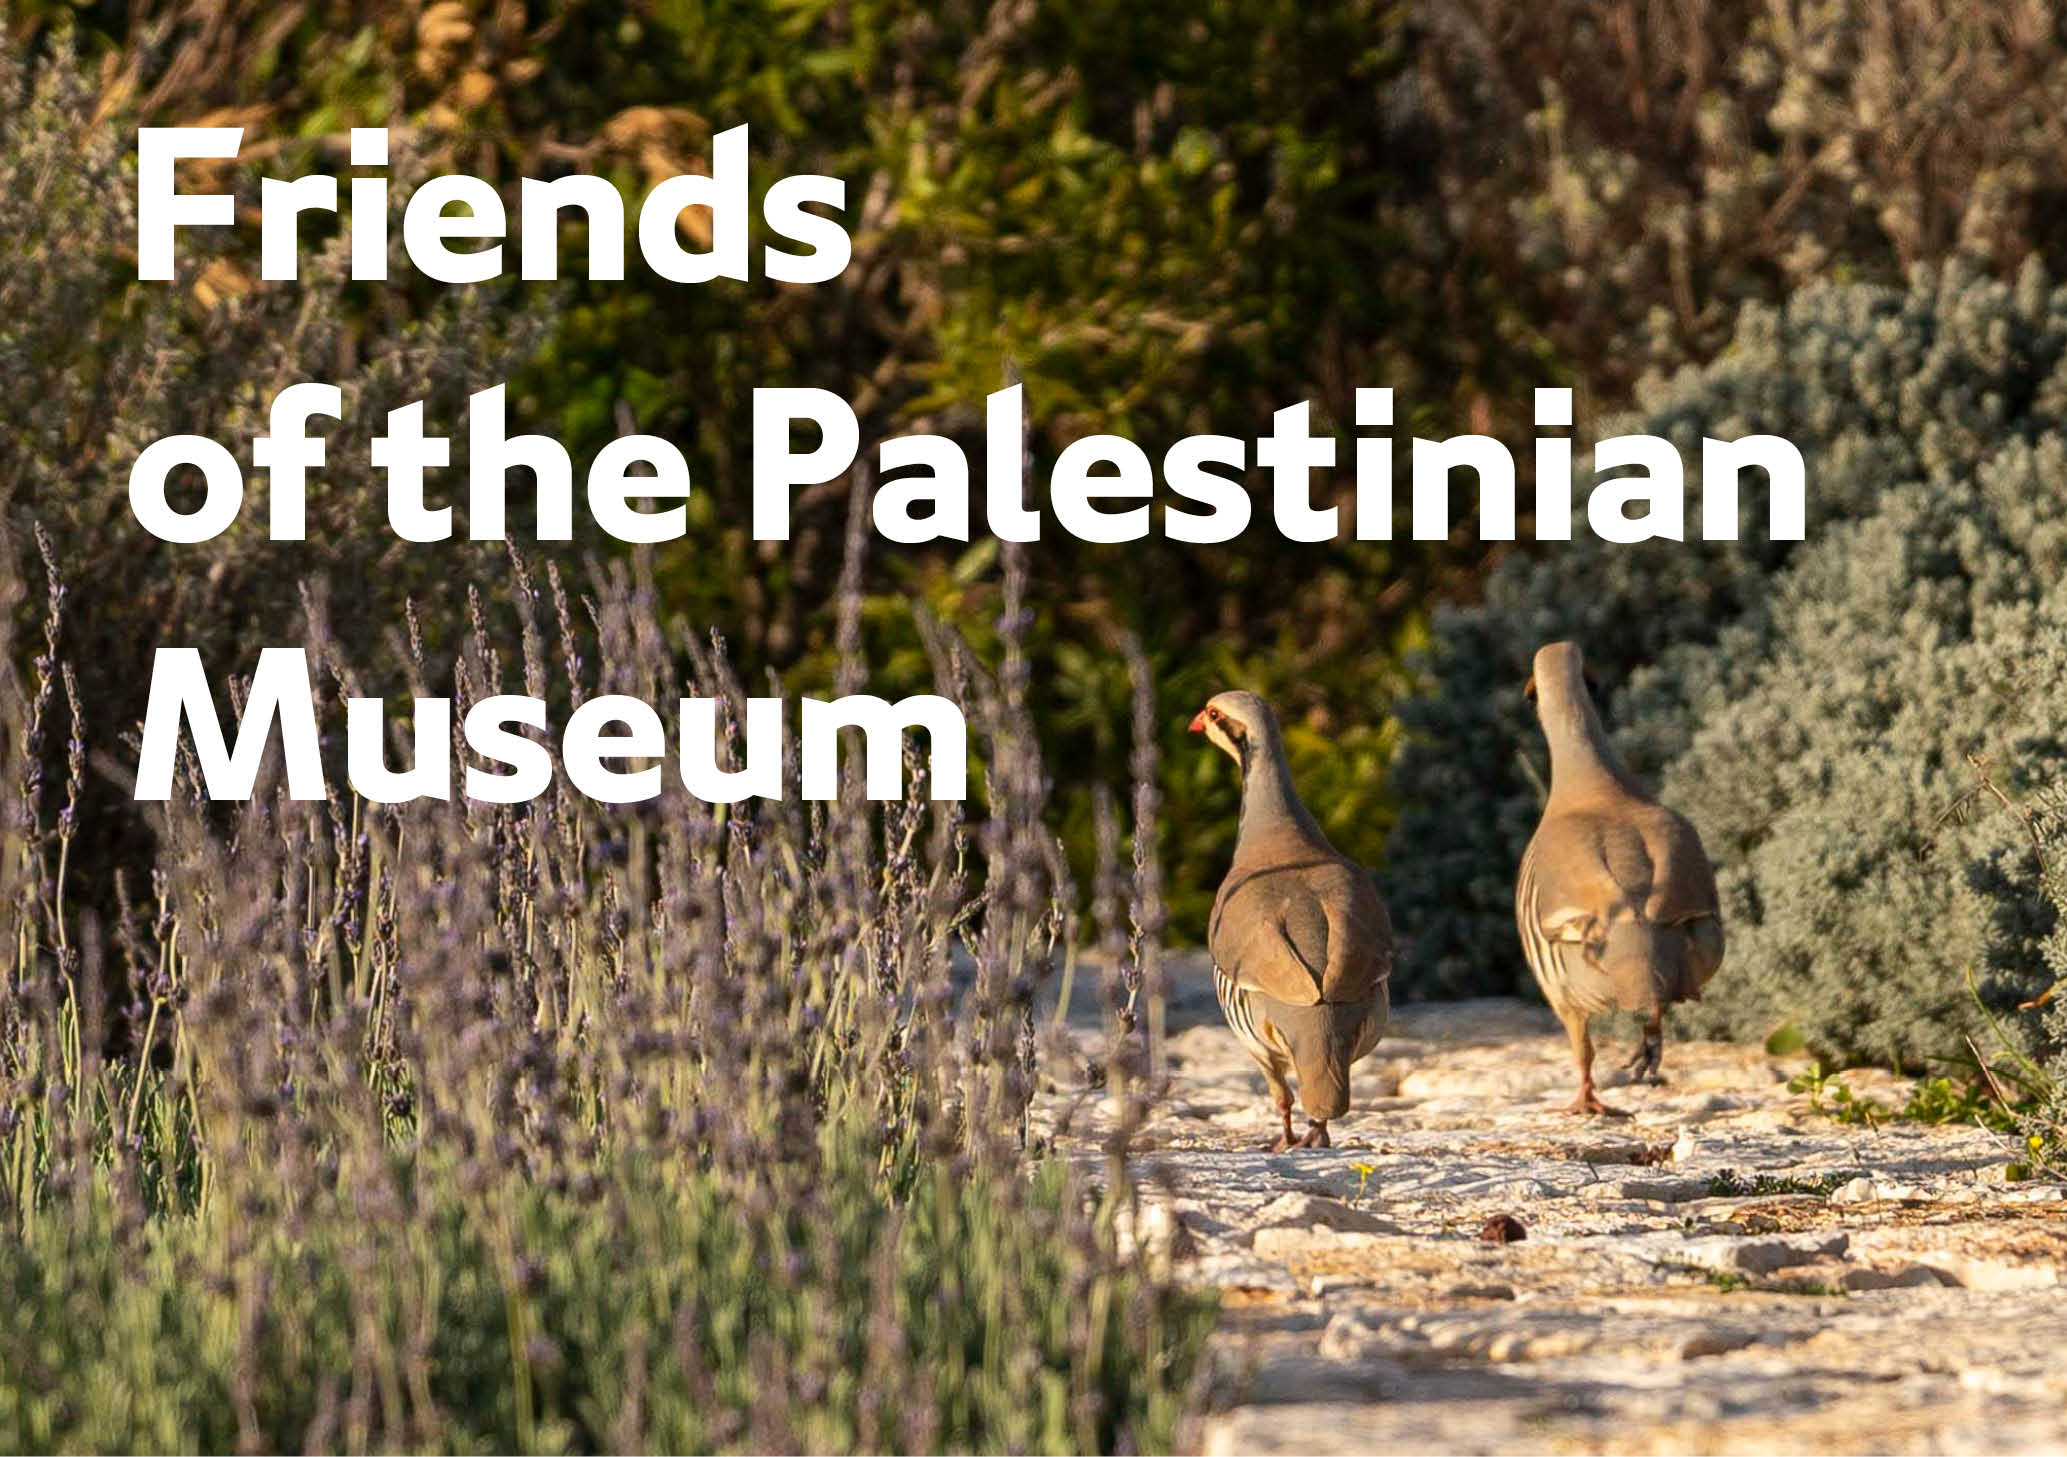 Friends of the Palestinian Museum